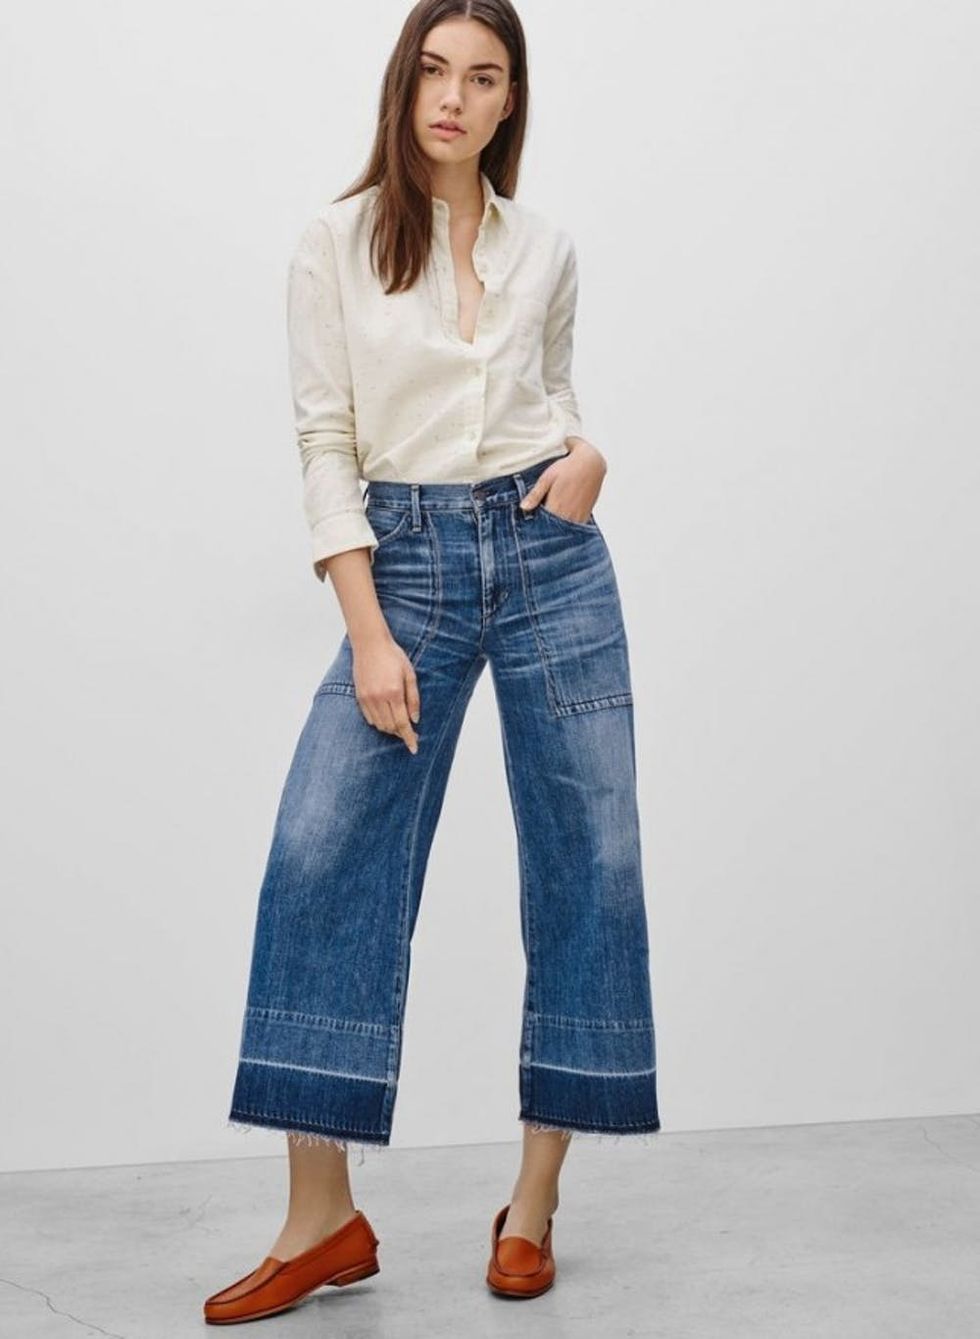 This Unexpected Denim Trend Will Be Everywhere This Spring - Brit + Co